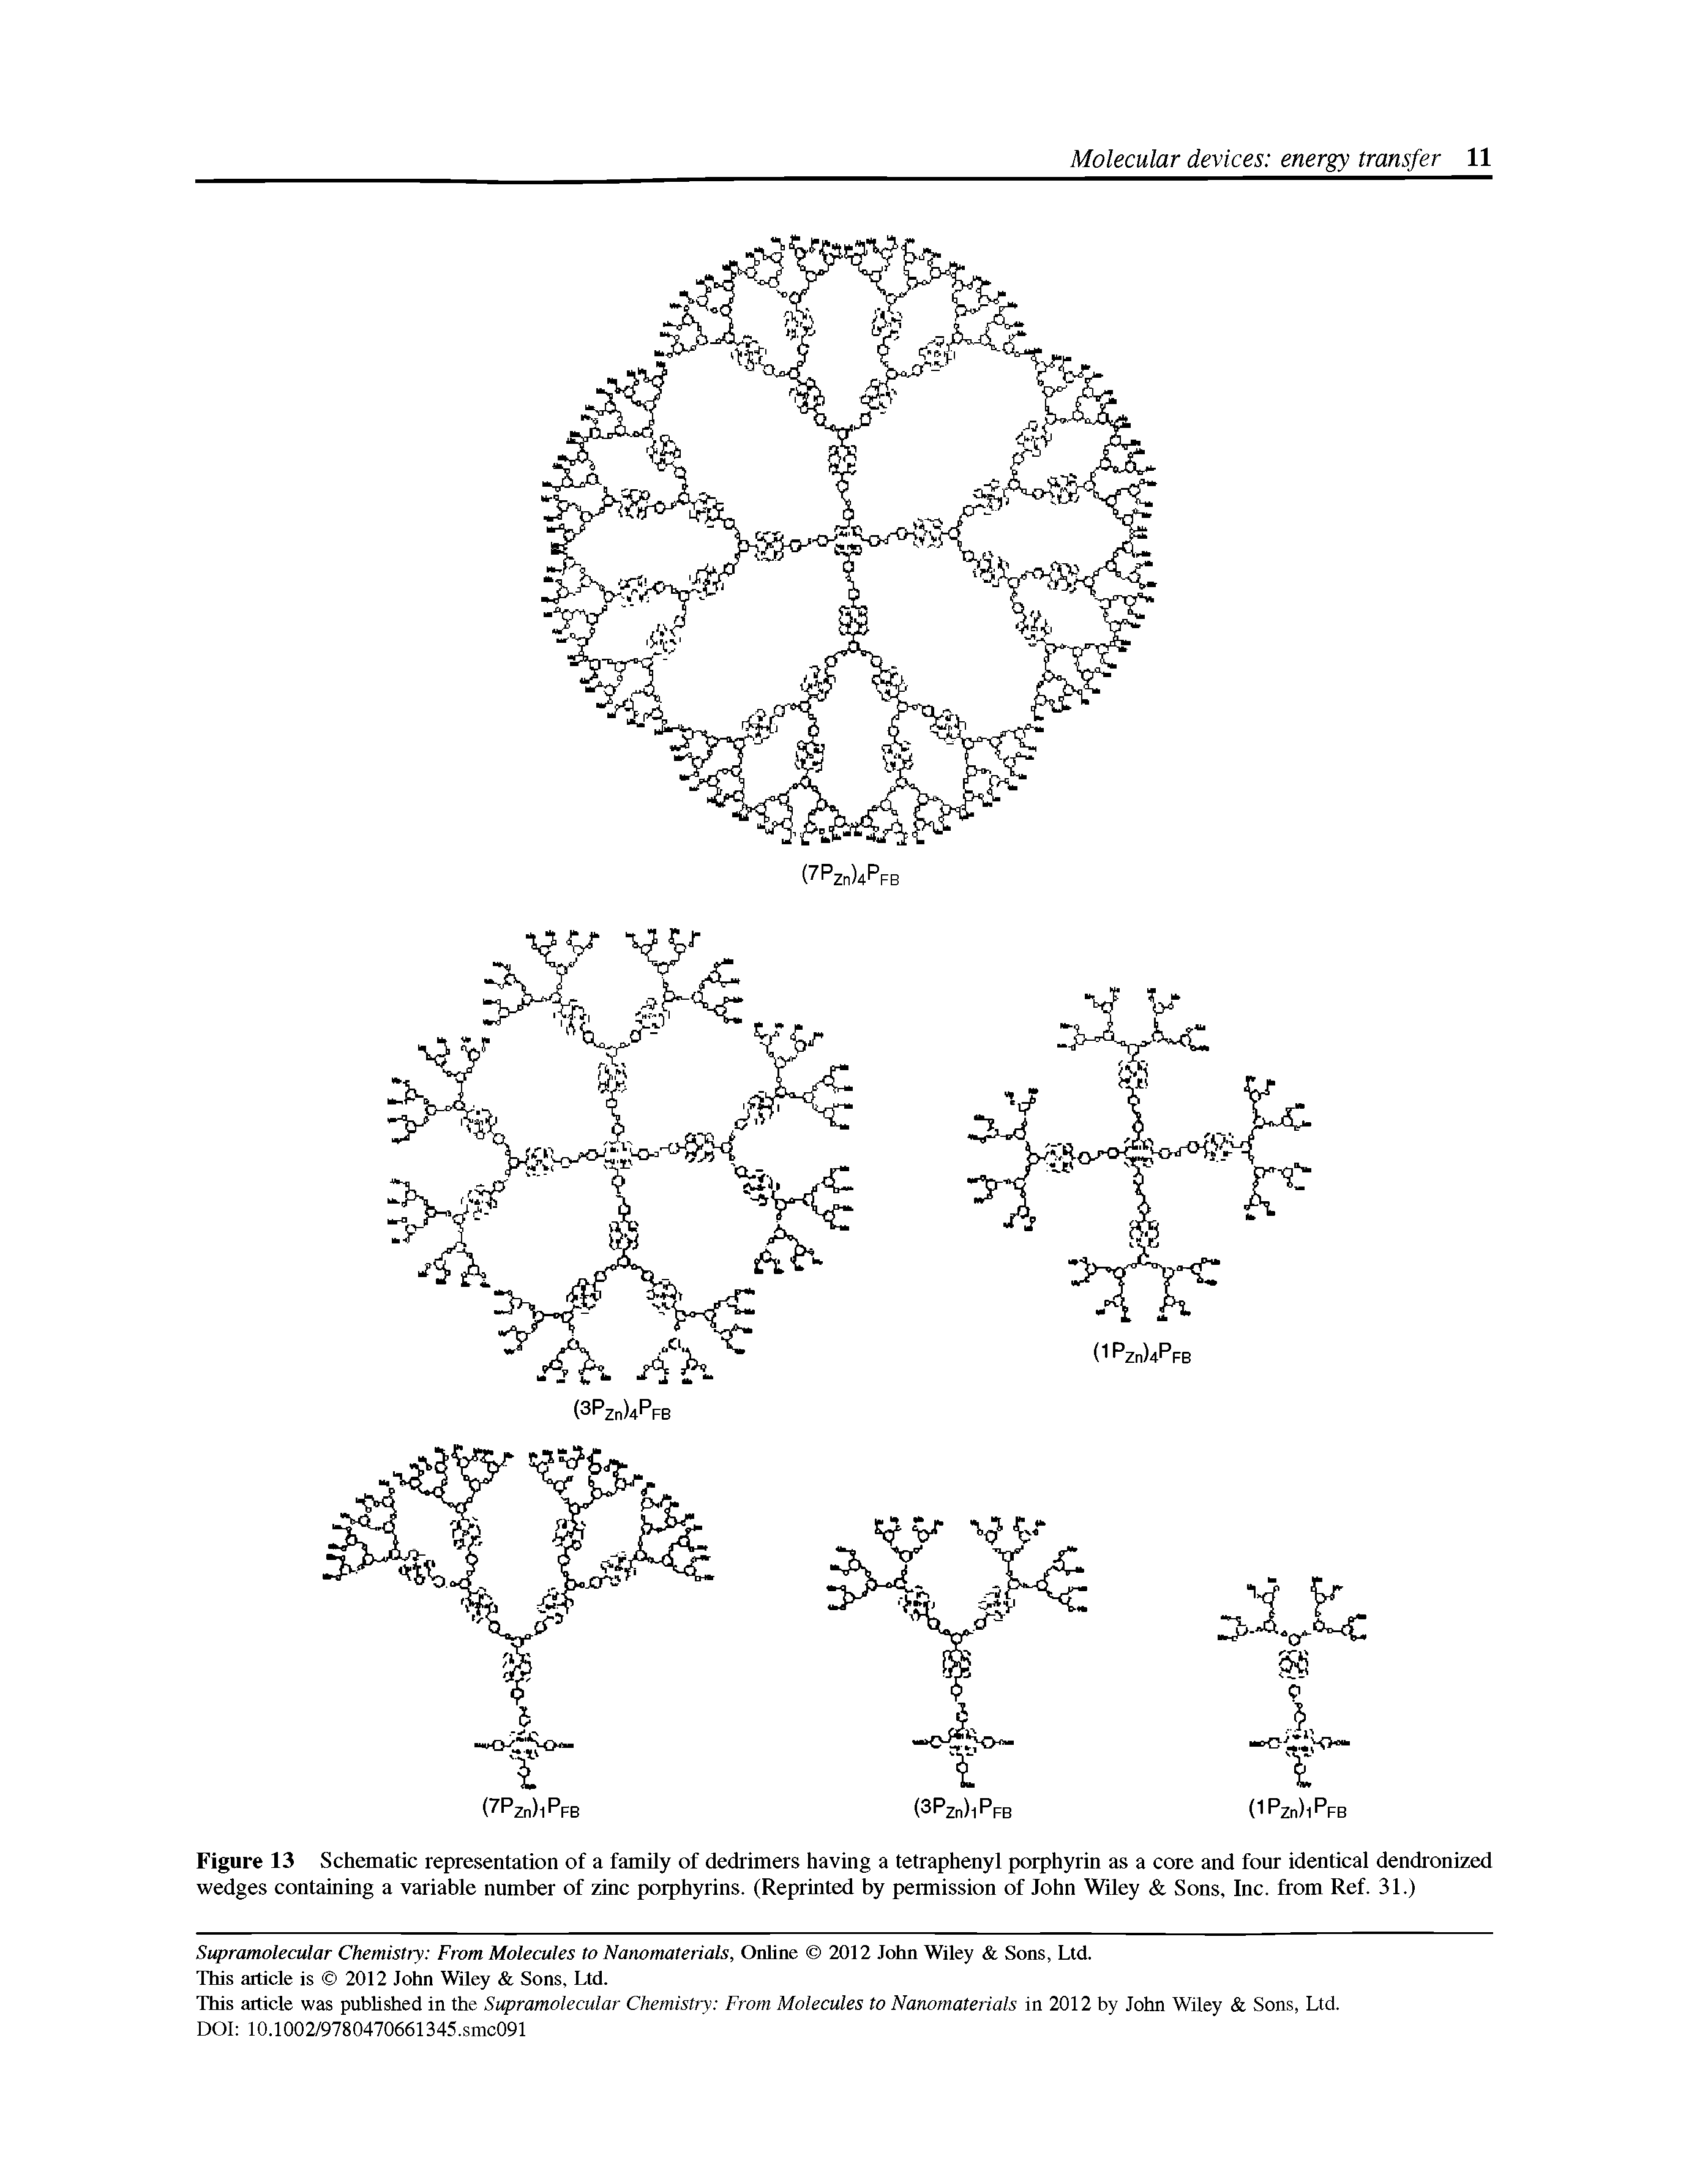 Figure 13 Schematic representation of a family of dedrimers having a tetraphenyl porphyrin as a core and four identical dendronized wedges containing a variable number of zinc porphyrins. (Reprinted by permission of John Wiley Sons, Inc. from Ref. 31.)...